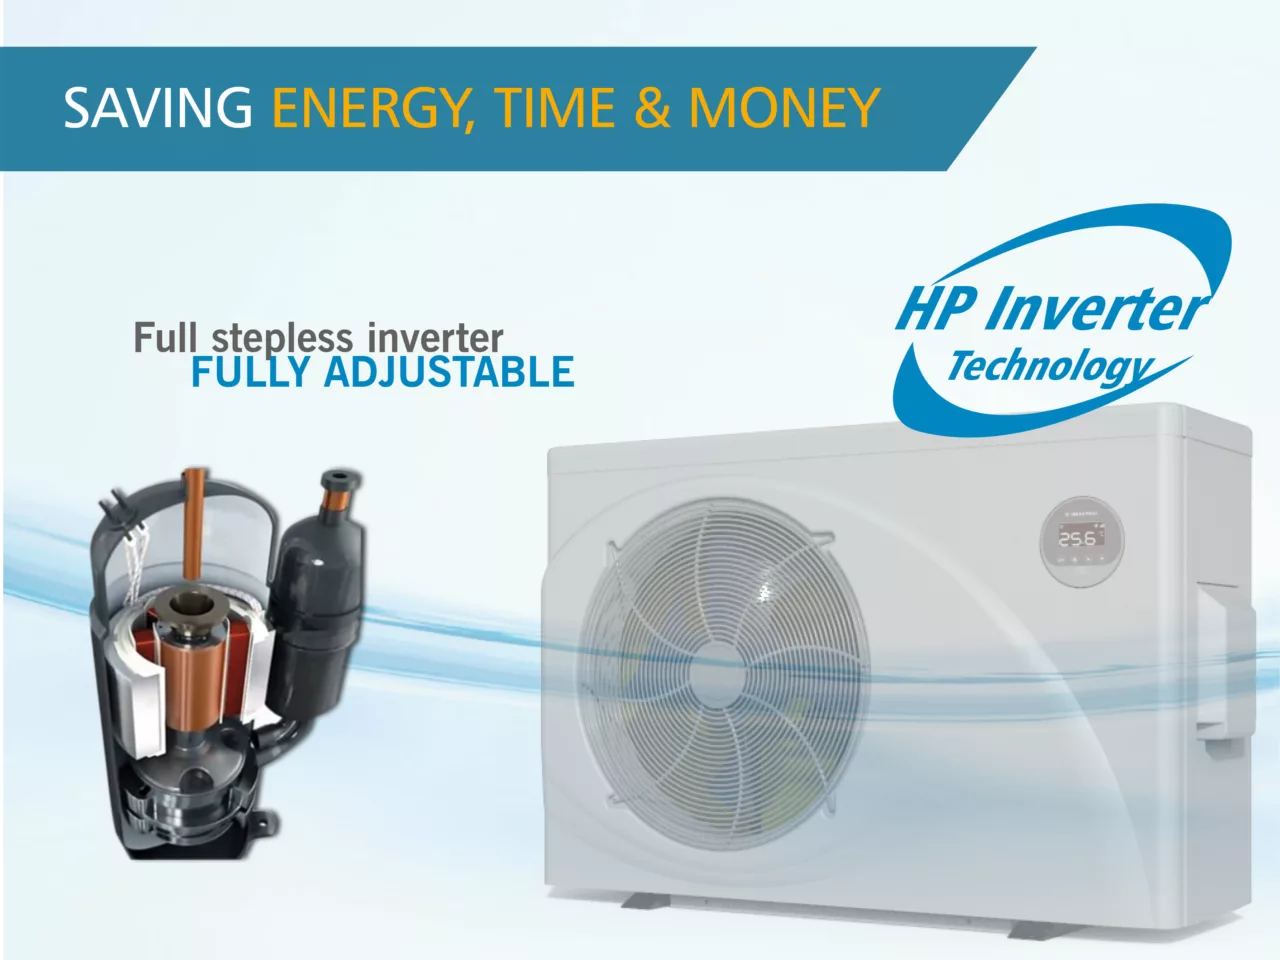 Why Microwell Inverter? | Blog - Microwell